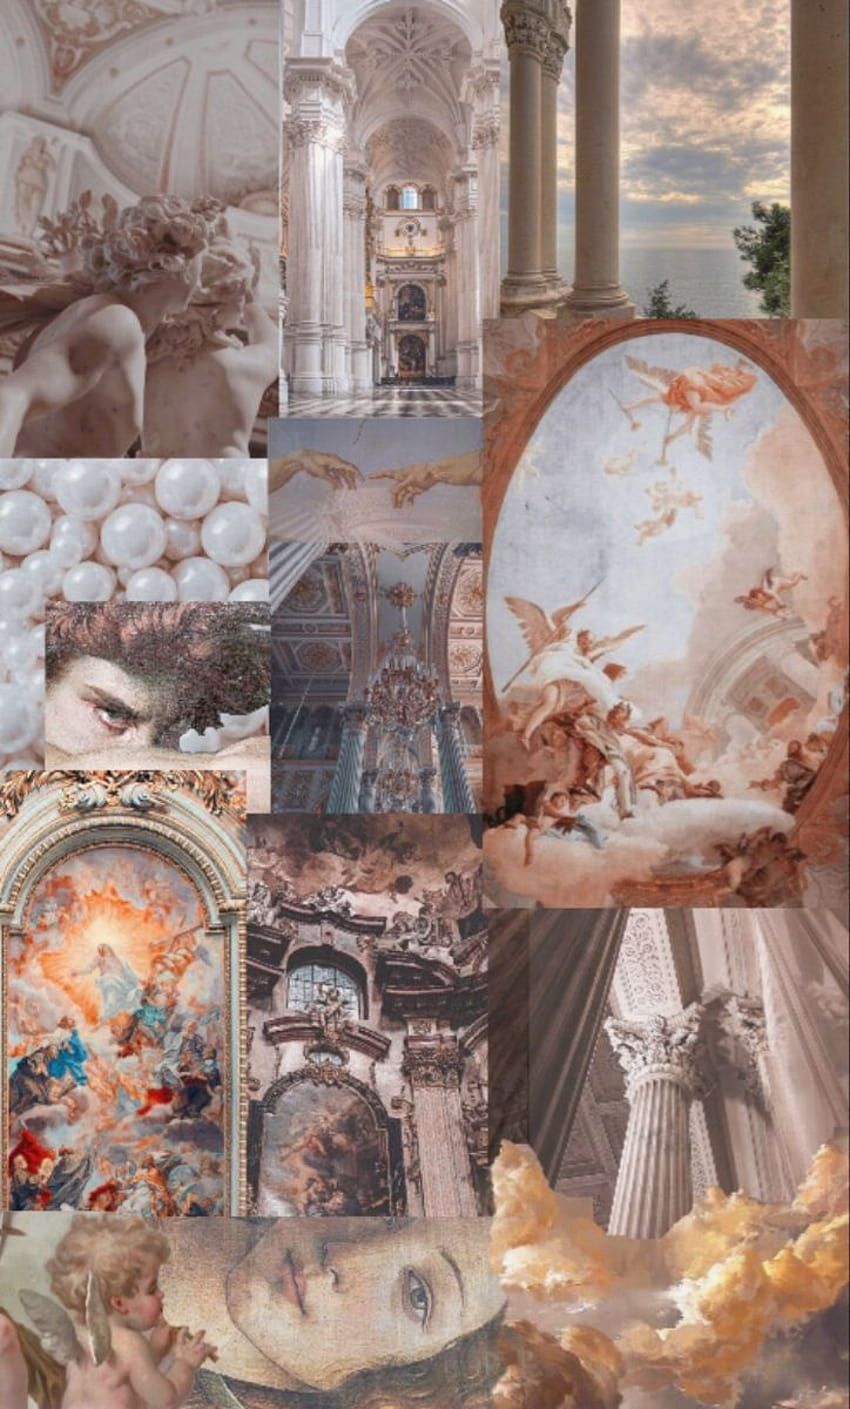 Aesthetic collage of art and architecture in a pink and white color scheme - Greek mythology